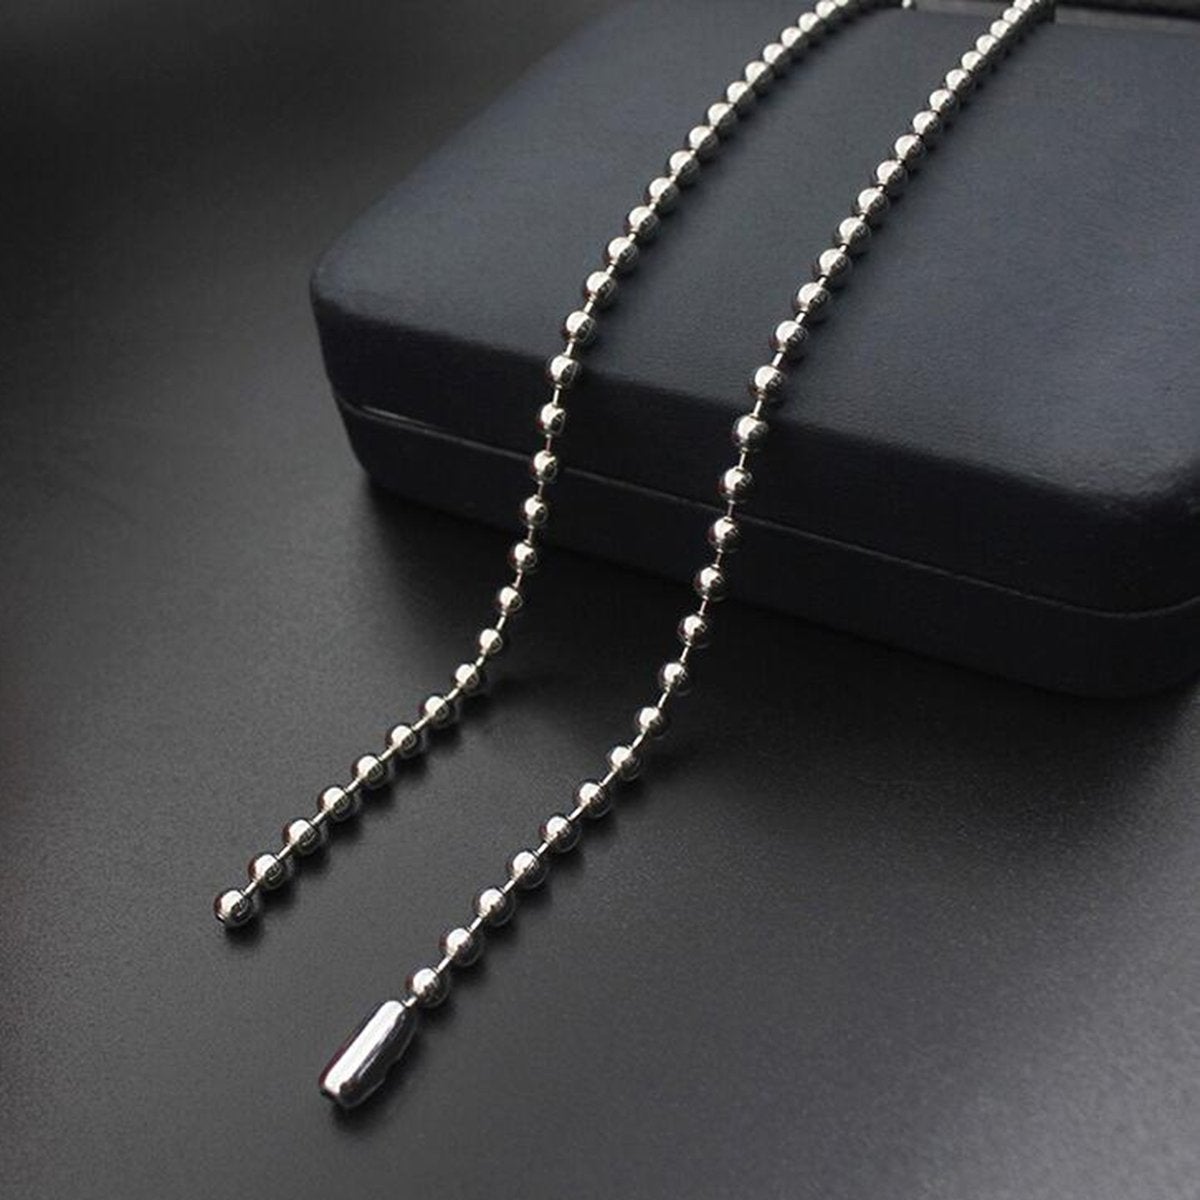 Ball Silver 316L Stainless Steel Long Necklace Chain 21" Men Women